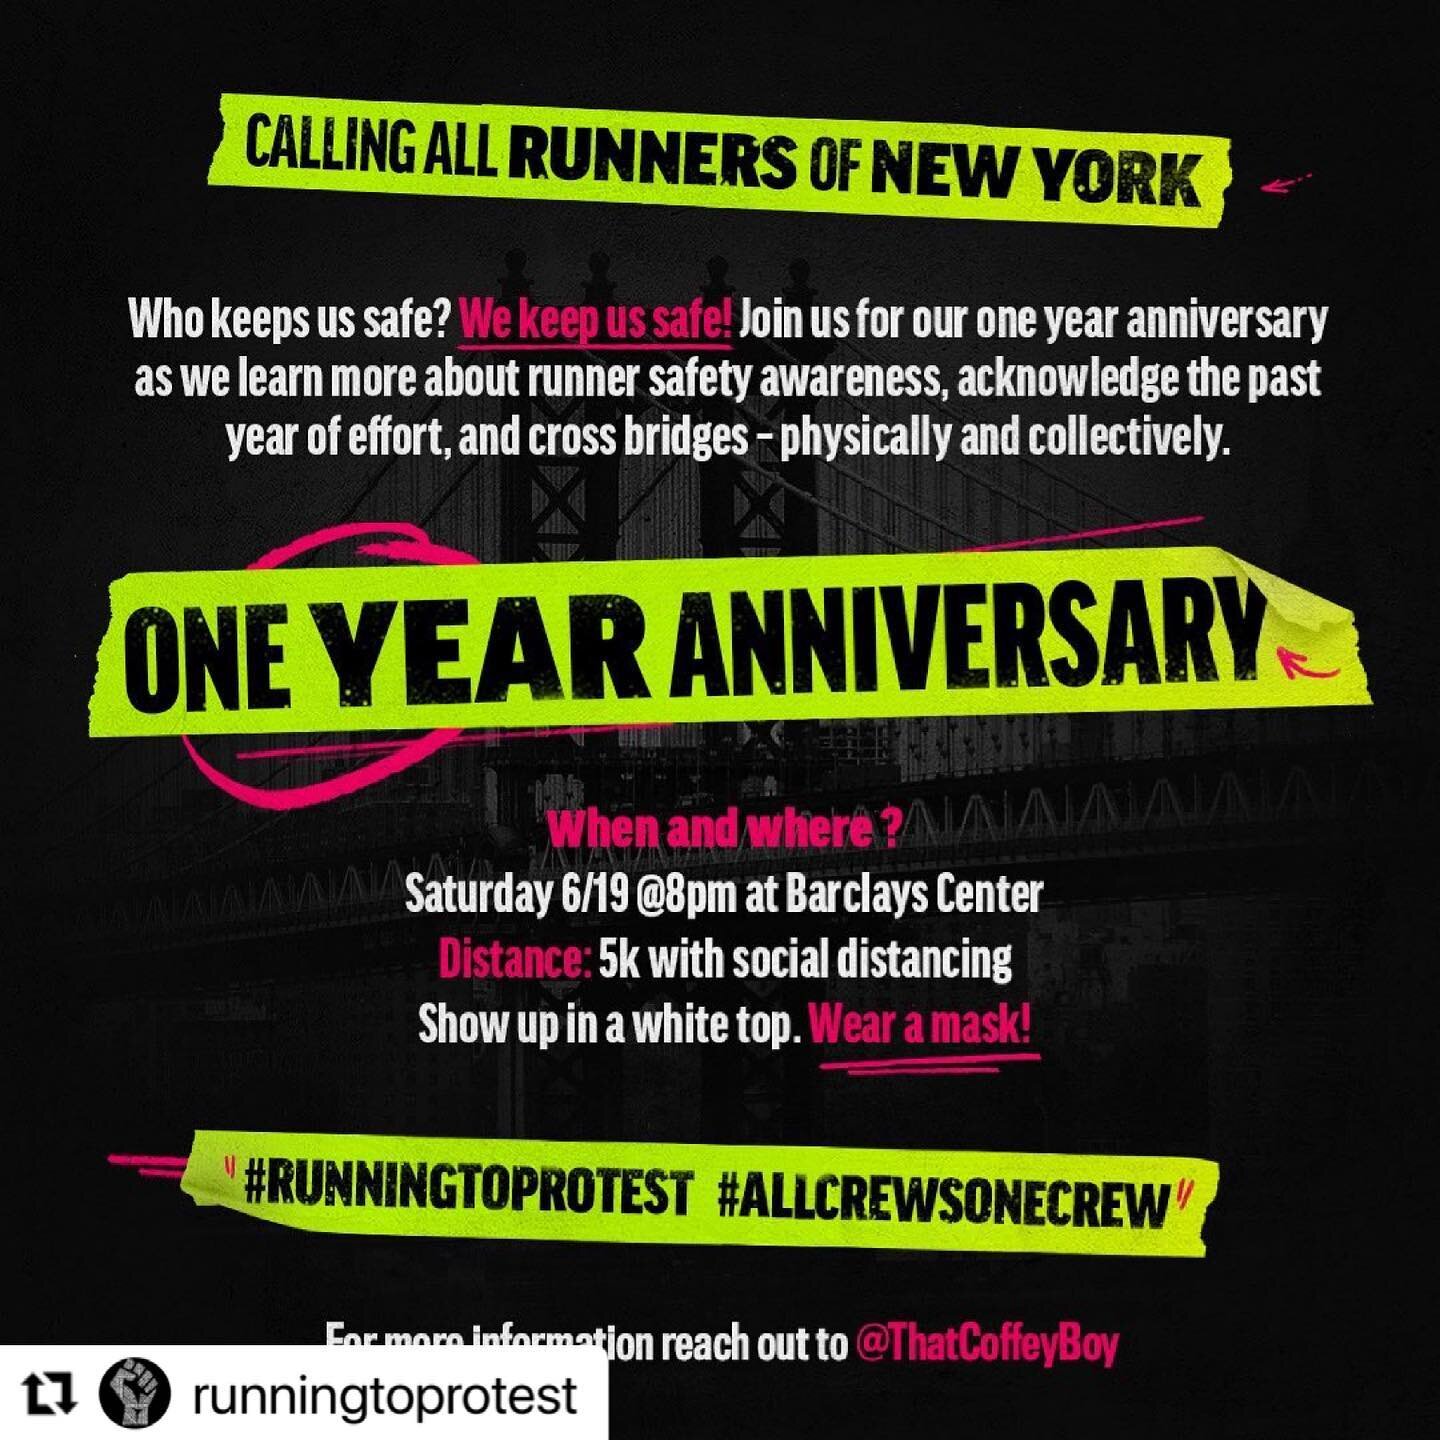 #Repost @runningtoprotest with @make_repost
・・・
This Saturday, we talk about runner safety.
This Saturday, we continue to bridge the gaps between sport and life.
This Saturday, we acknowledge where we&rsquo;ve been and where we&rsquo;re going.

Sprea